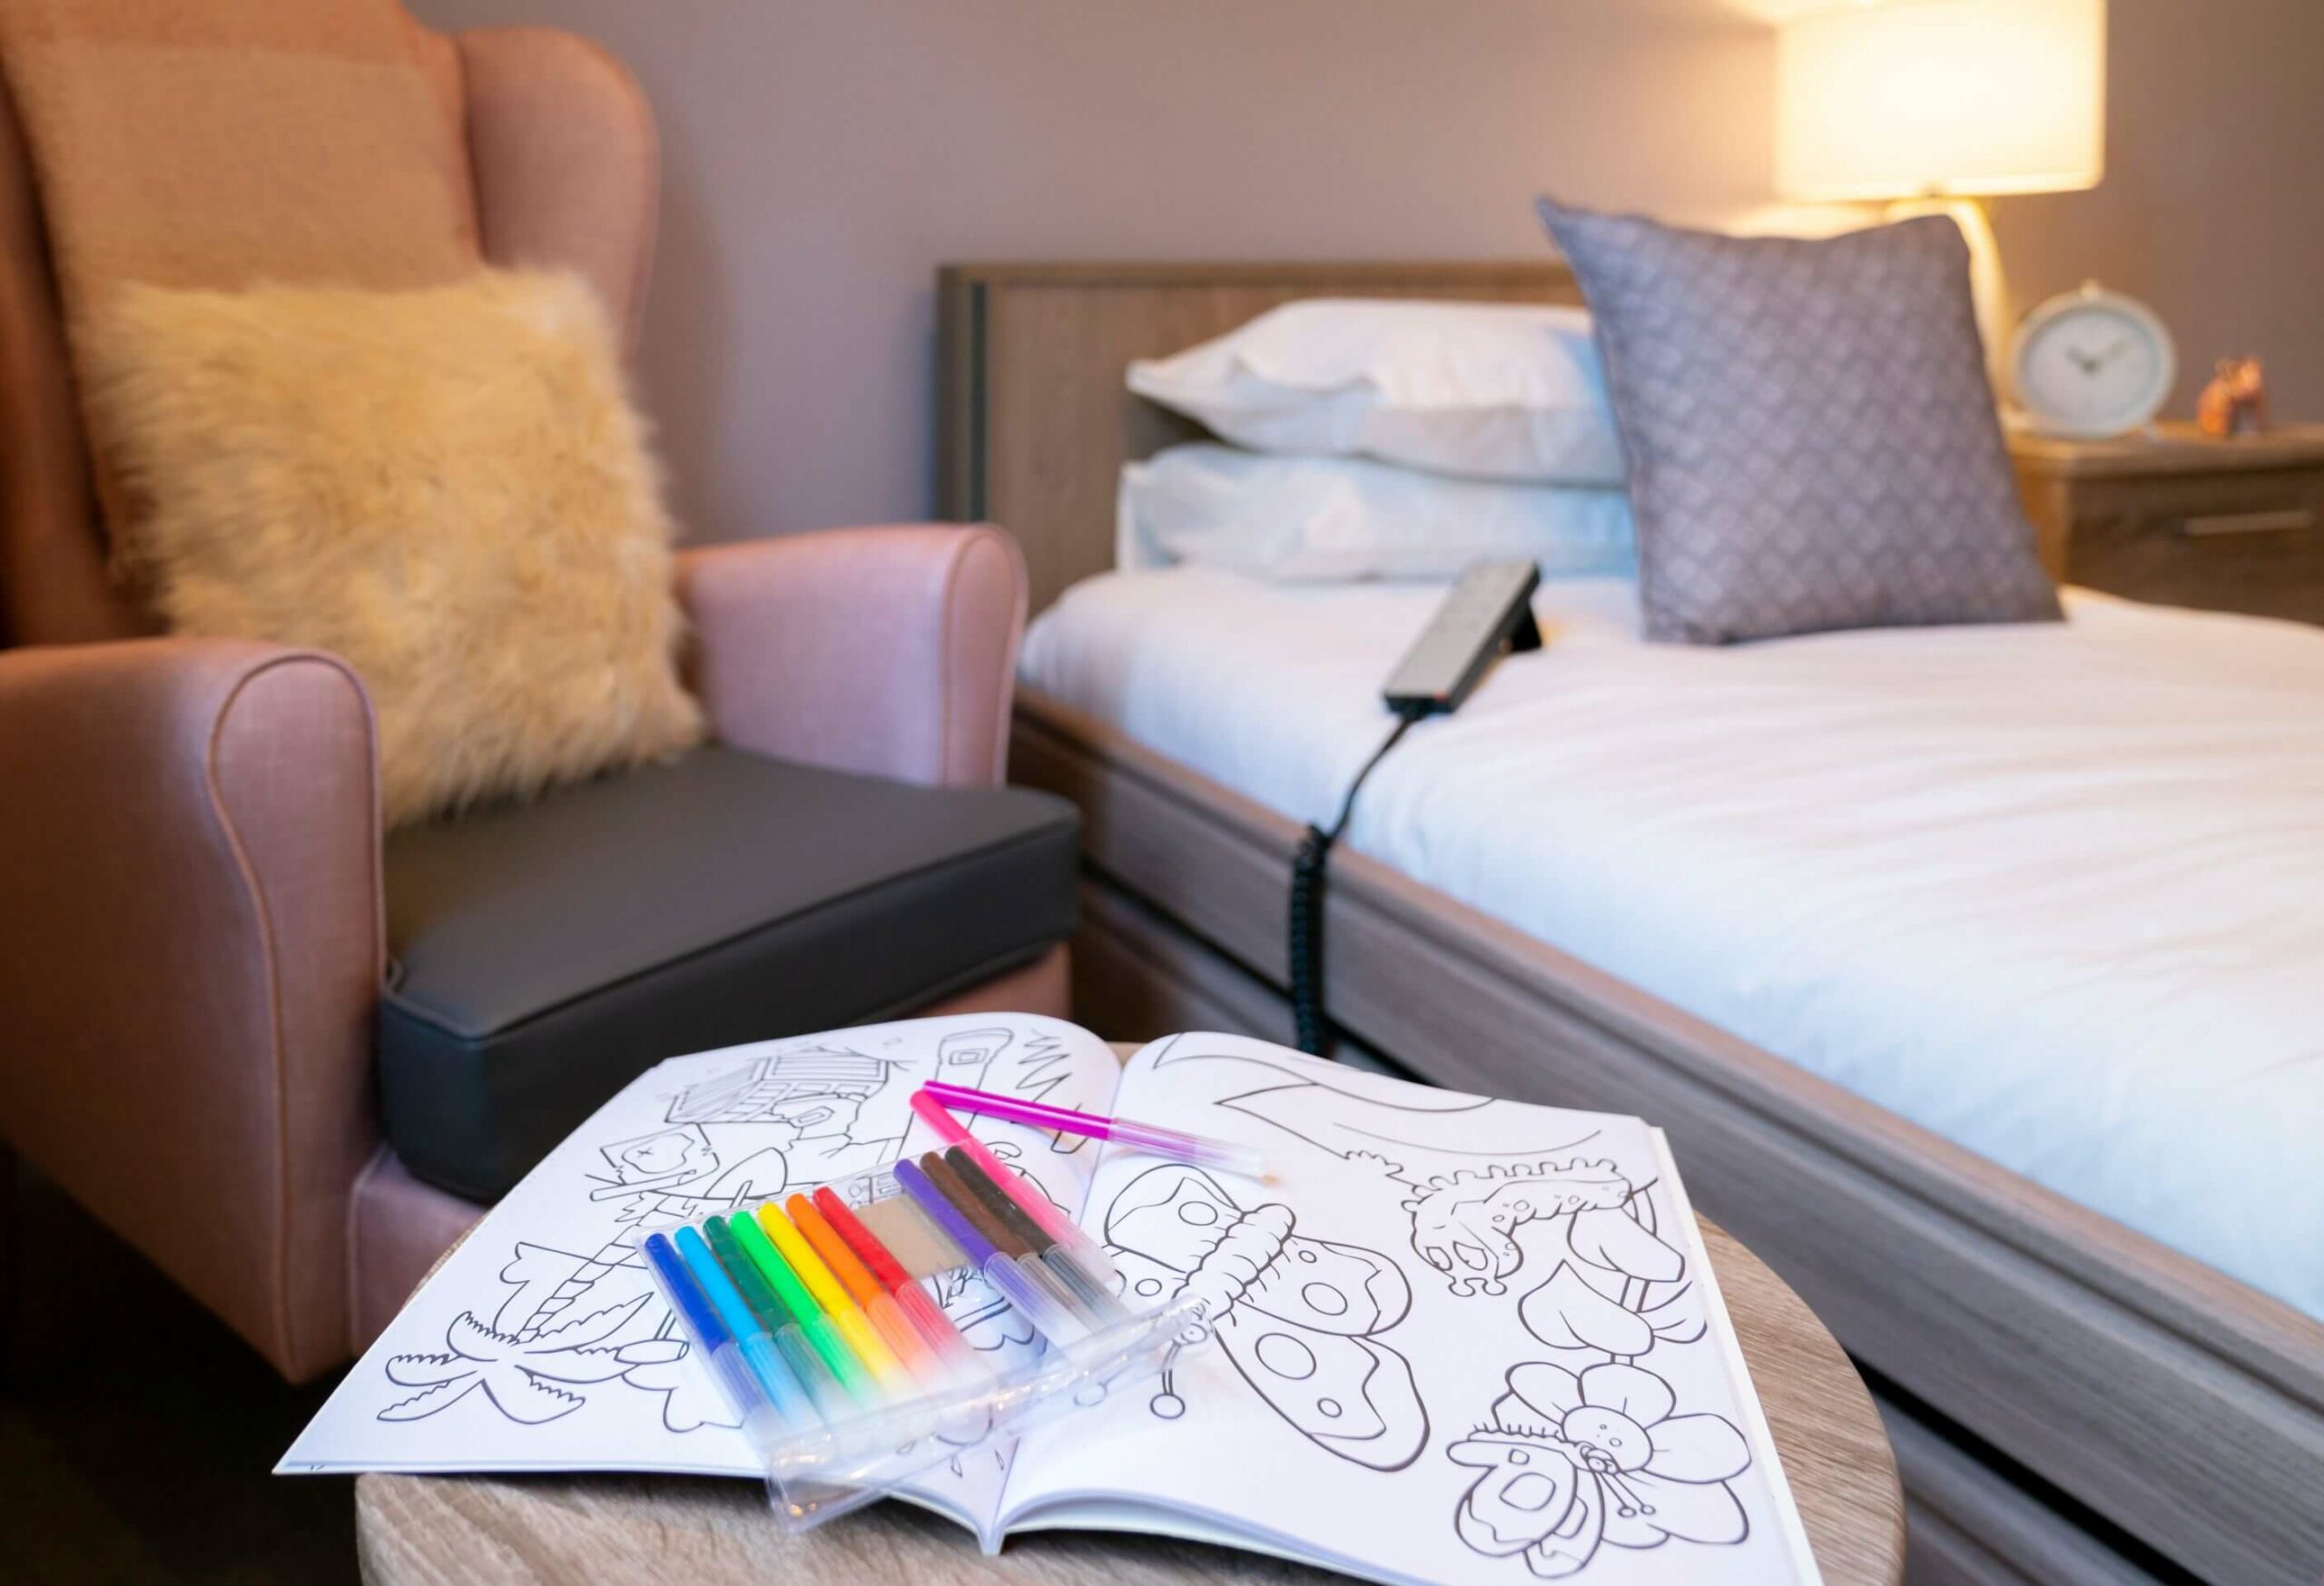 Colouring activities in bed